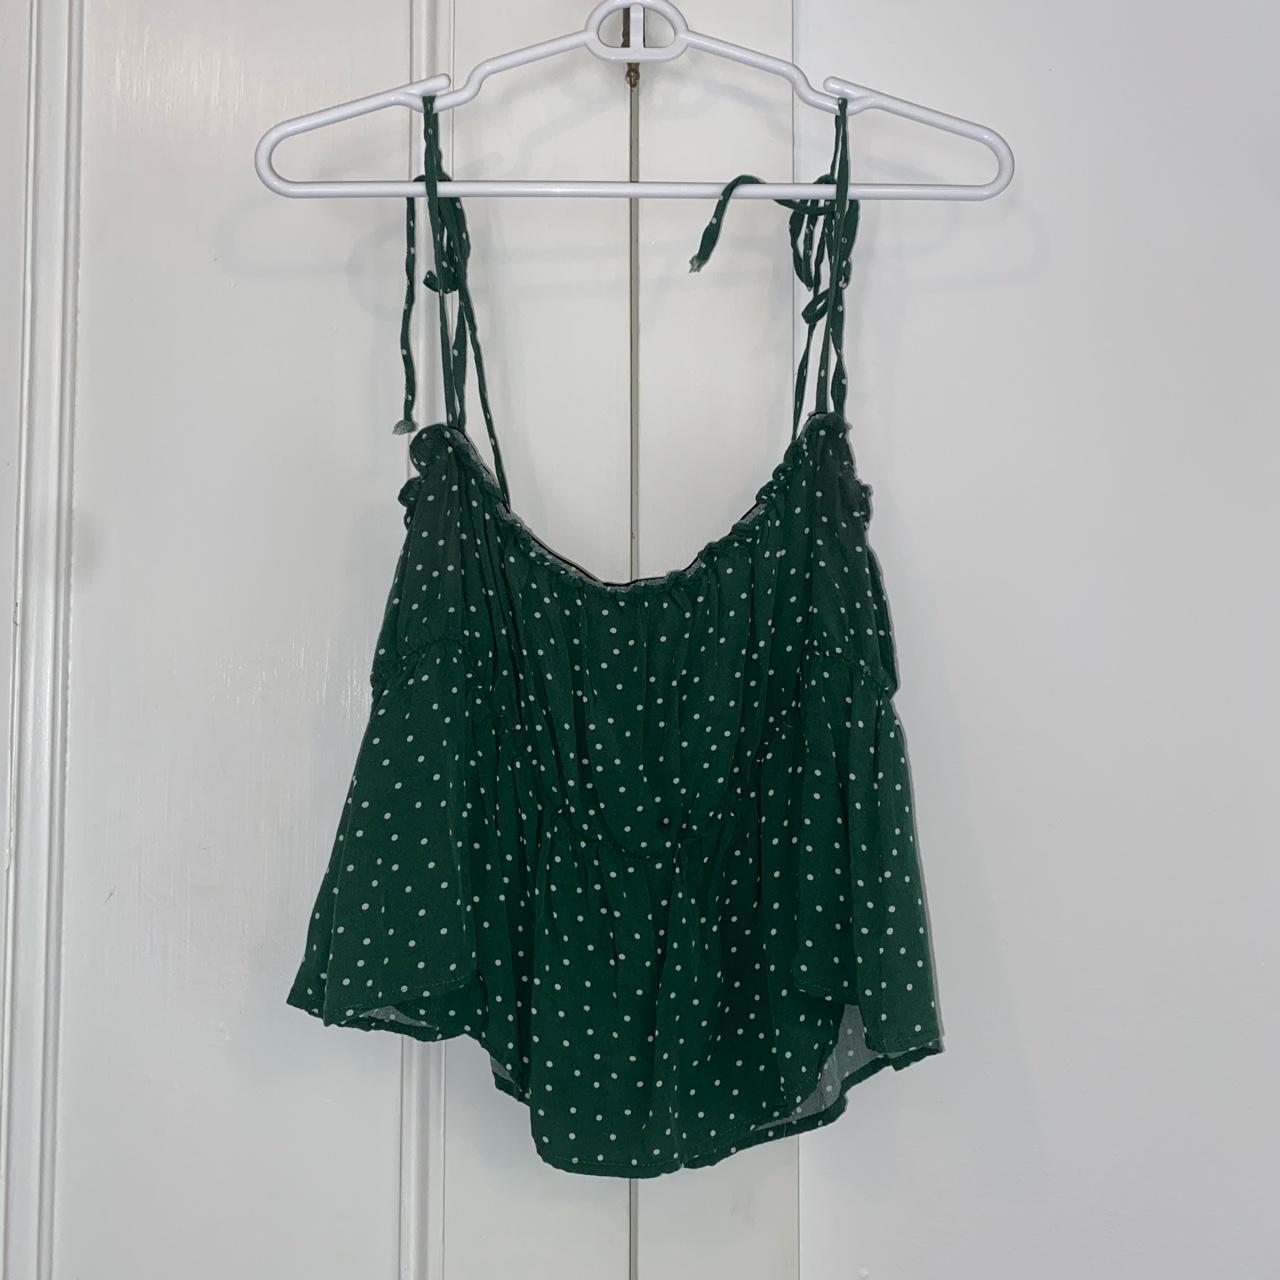 Product Image 1 - green polka dot flowy top

has